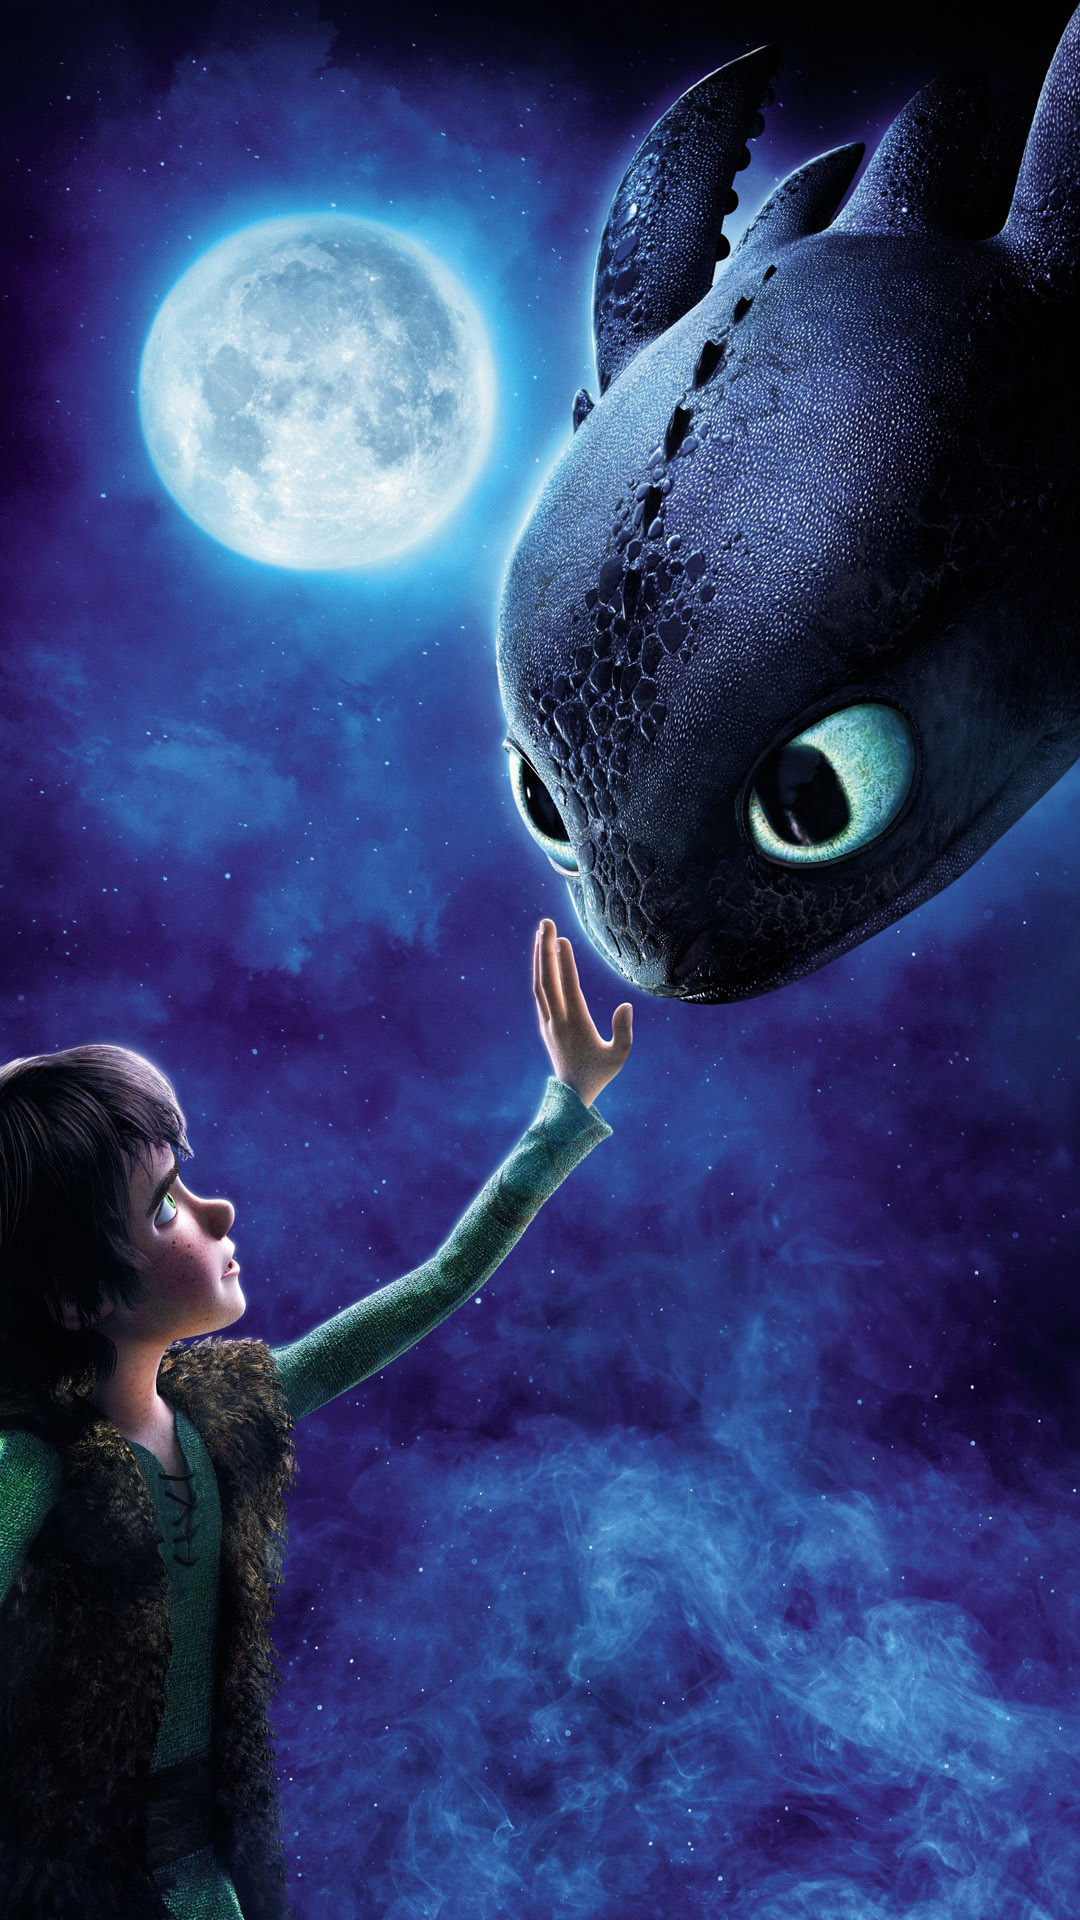 1080x1920 ... Images  How To Train Your Dragon Mobile Wallpaper 10591  Dreamworks